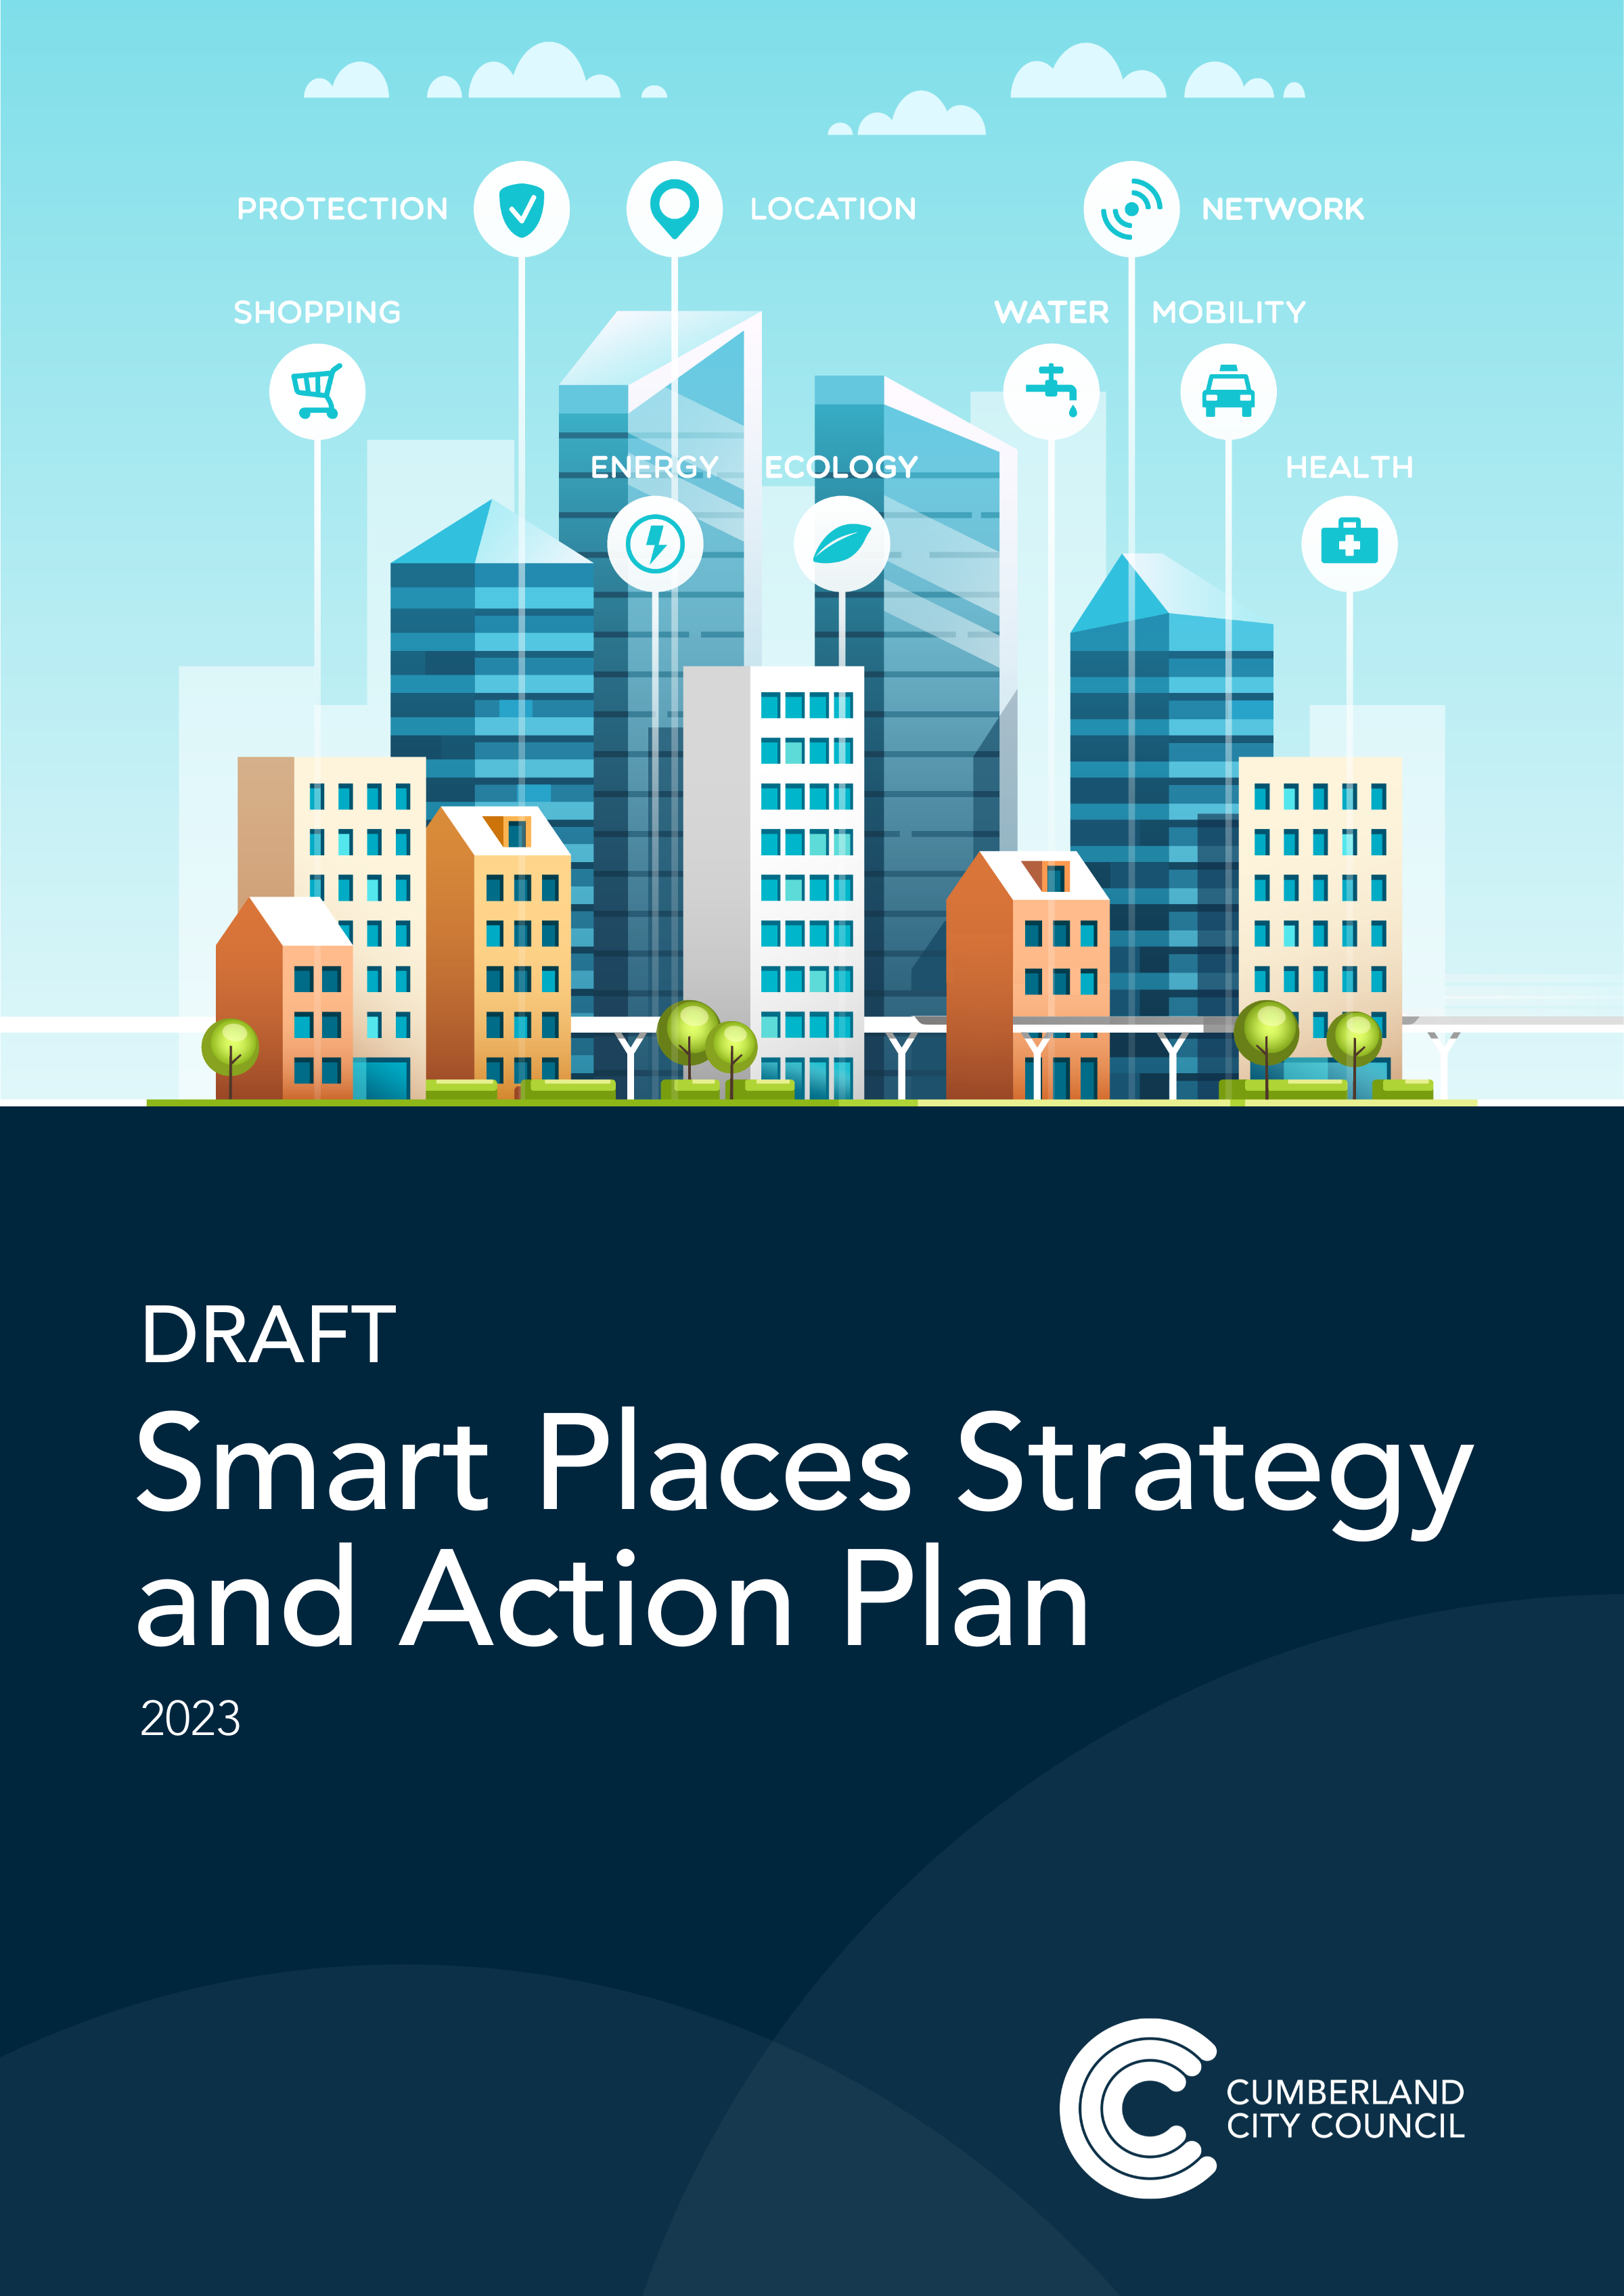 Smart places strategy cover